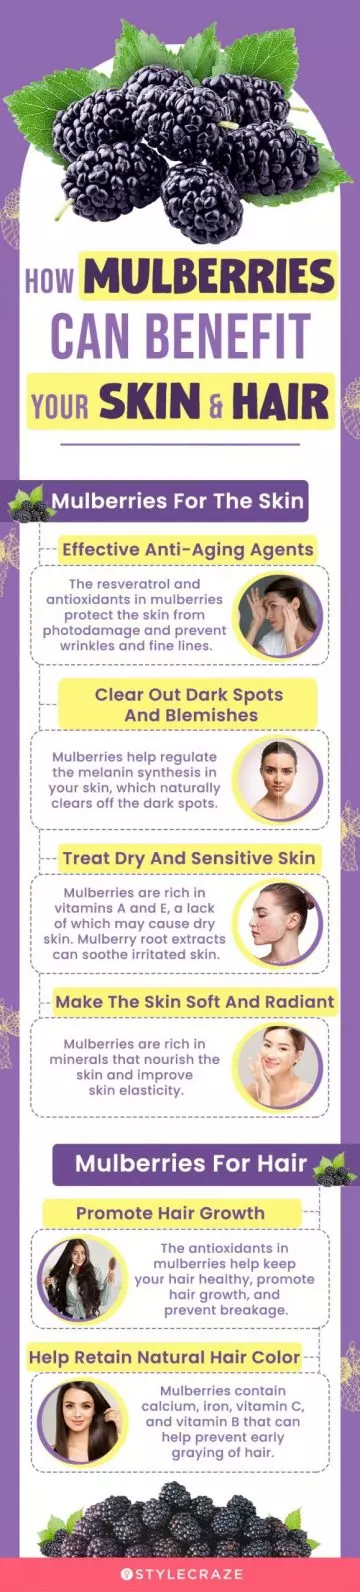 how mulberries can benefit your skin and hair(infographic)